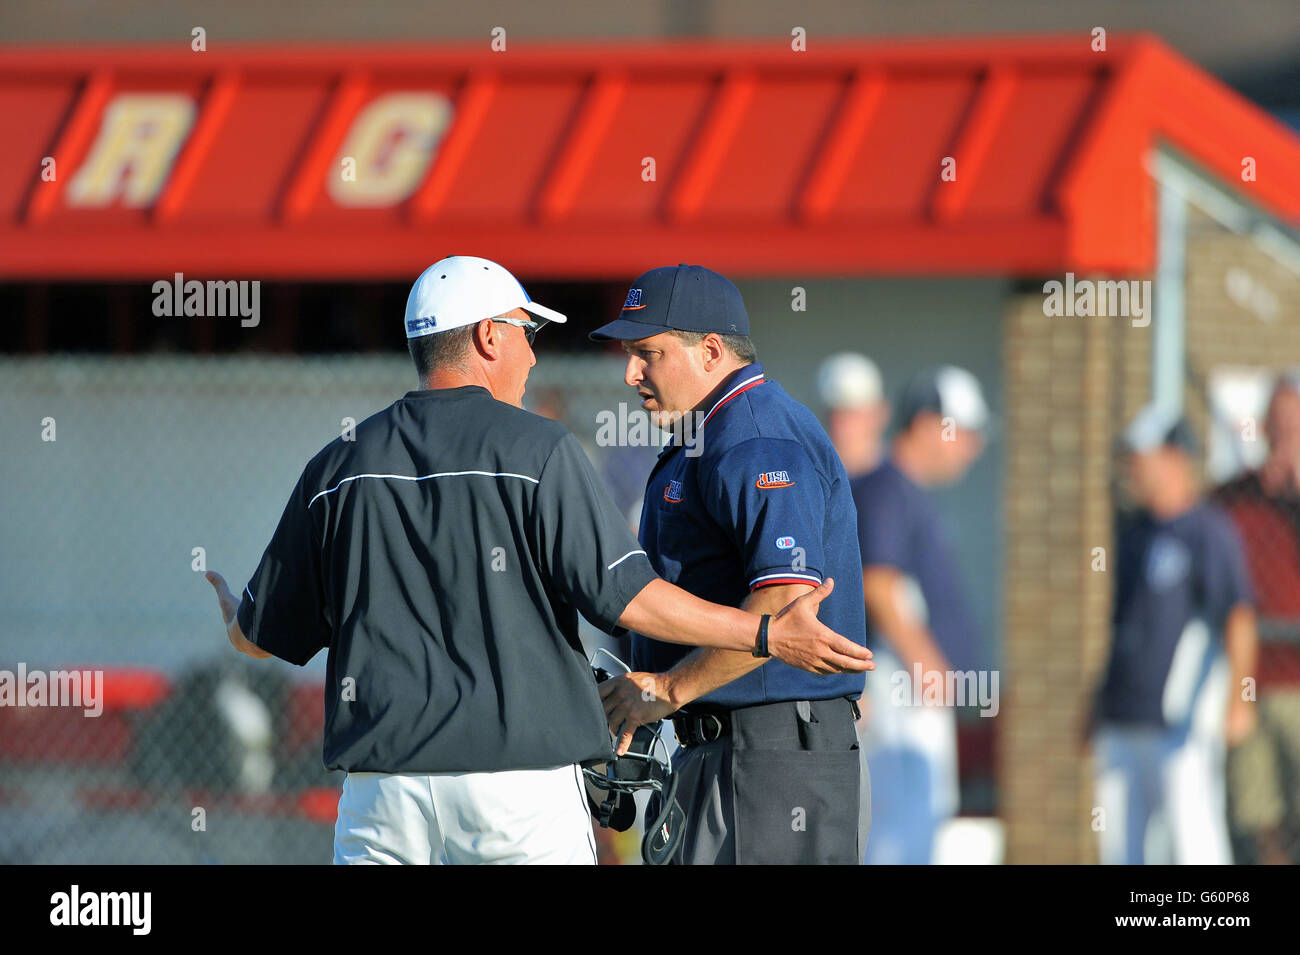 Coach arguing a call and requesting an explanation from an umpire during a high school baseball game. USA. Stock Photo